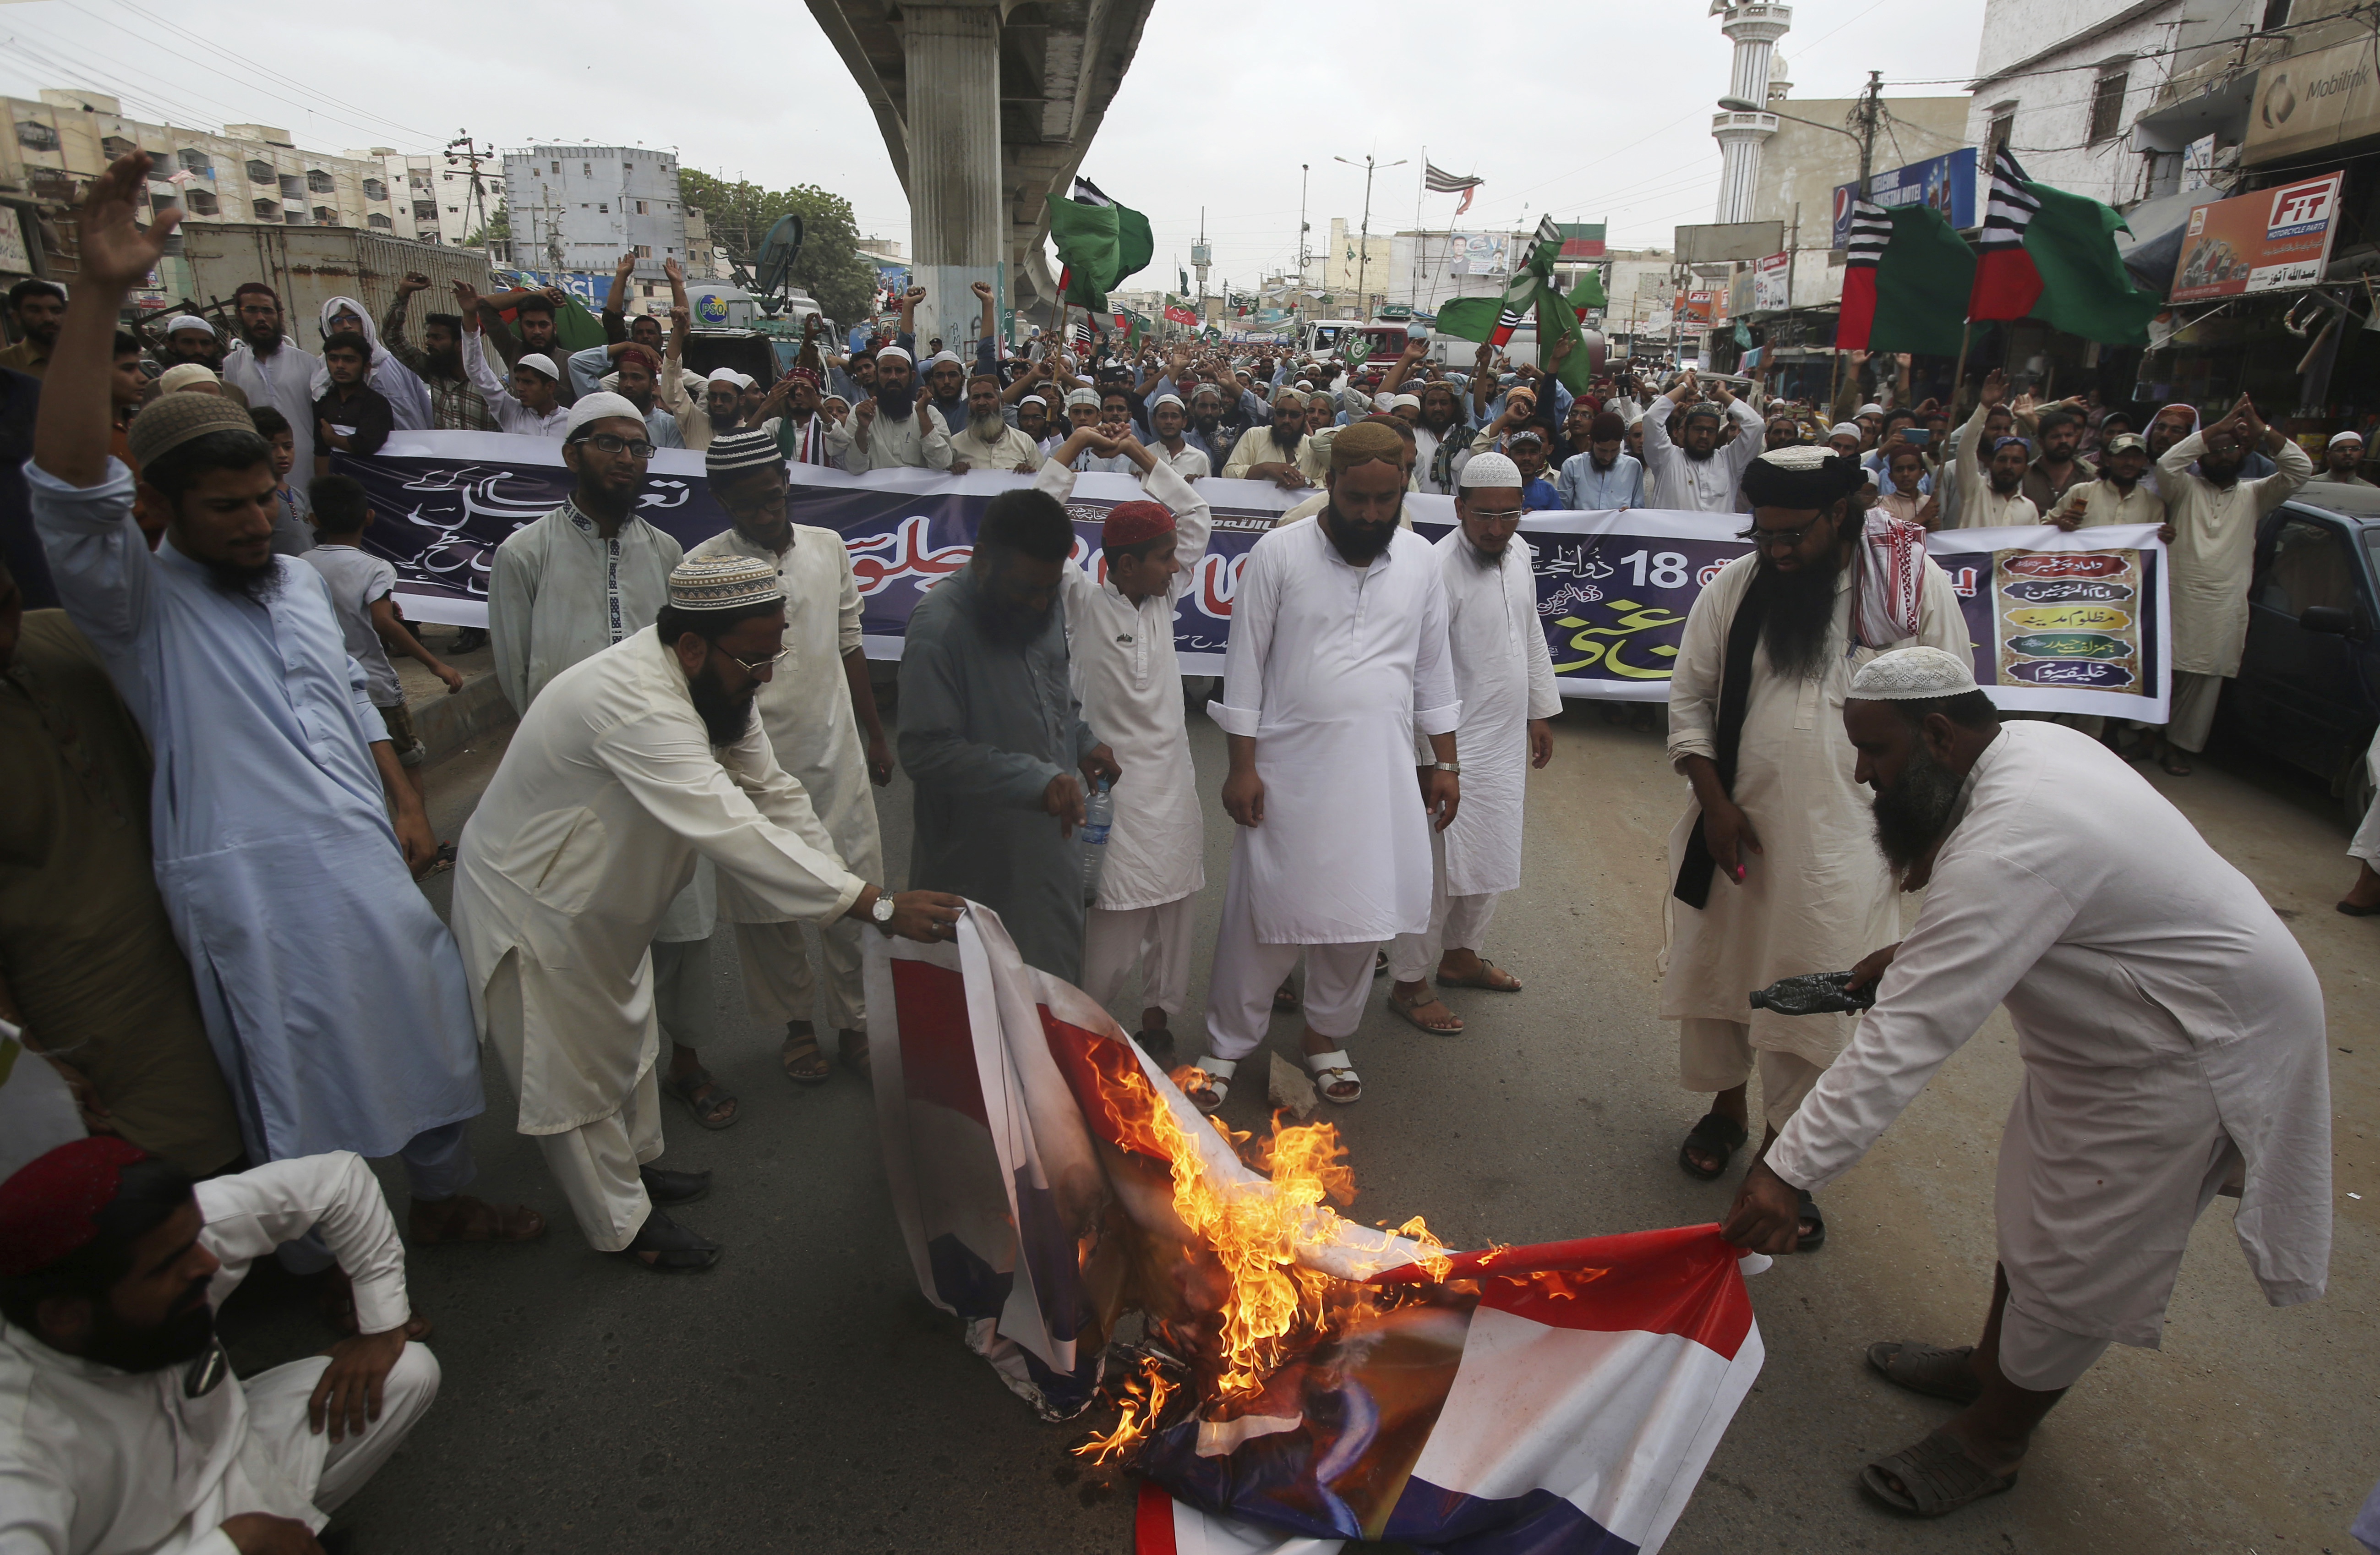 Pakistani protesters burn representation of Dutch flags during a protest to condemn the planned anti-Islam cartoon contest, in Karachi, Pakistan, Thursday, Aug. 30, 2018. Thousands of hard-line Islamists angered over a far-right Dutch lawmaker's plans to hold a Prophet Muhammad cartoon contest marched toward Pakistan's capital. (AP Photo/Fareed Khan)